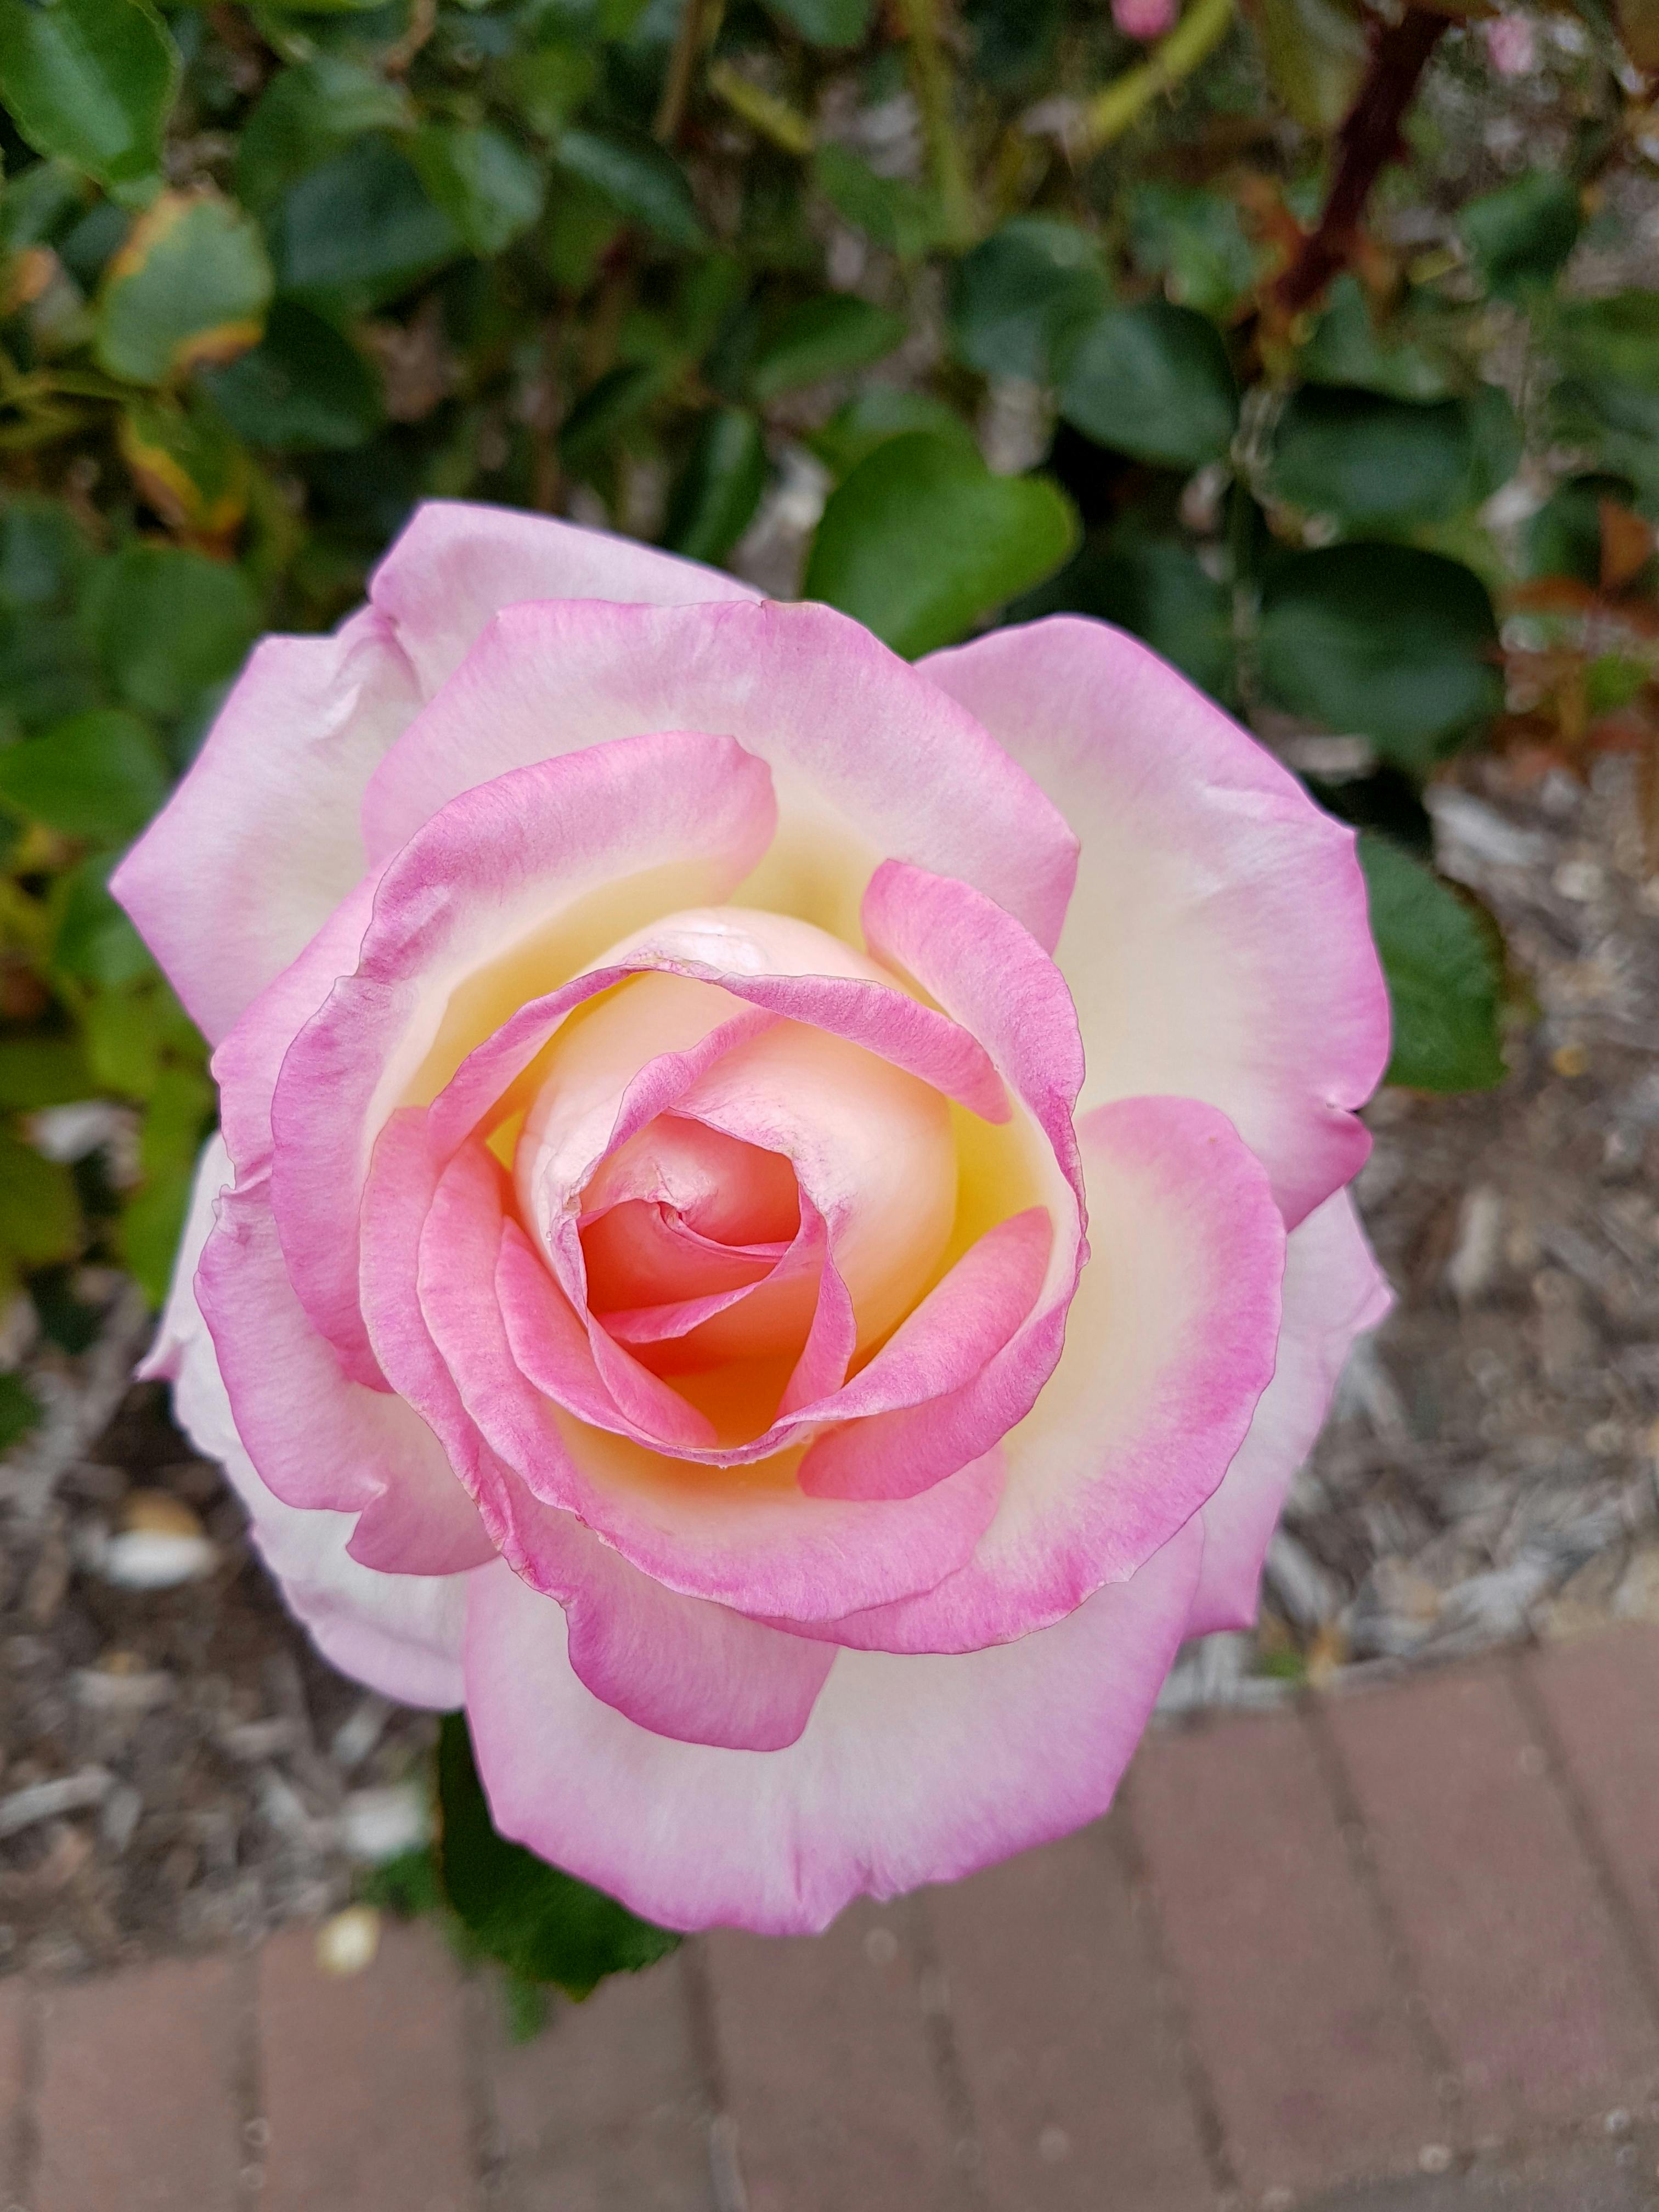 Free stock photo of pink and white rose, pretty, rose